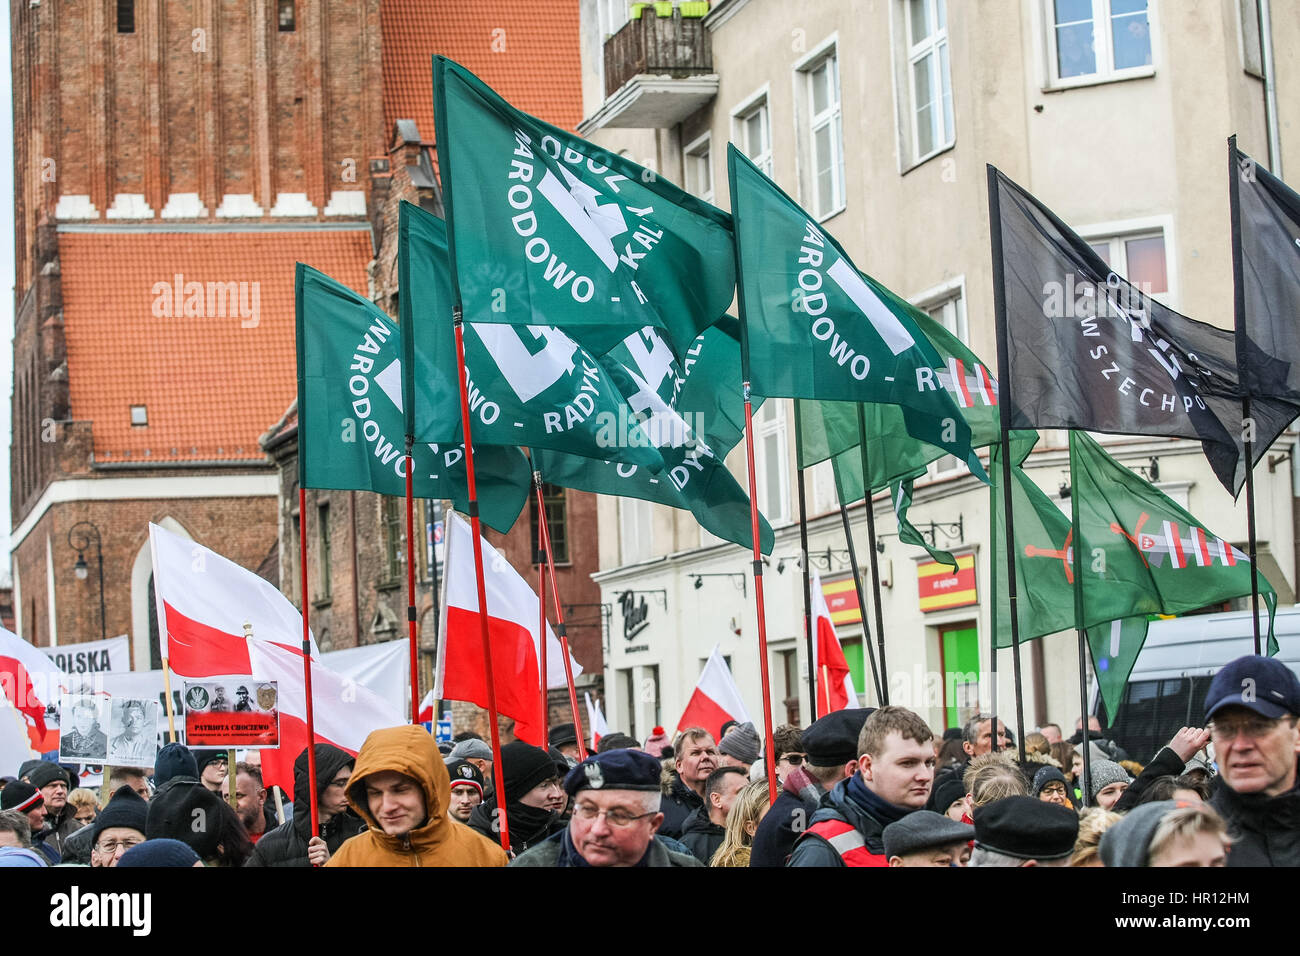 Gdansk, Poland. 26th February 2017. Far right nacionalist organization ONR (Oboz Narodowo Radykalny ) members with Falanga flags are seen during the Cursed soldiers Day parade on 26 February 2017  in Gdansk, Poland. The Cursed soldiers were a members of anti-communist Polish resistance movements formed in the later stages of World War II and its aftermath by some members of the Polish Underground State. Credit: Michal Fludra/Alamy Live News Stock Photo